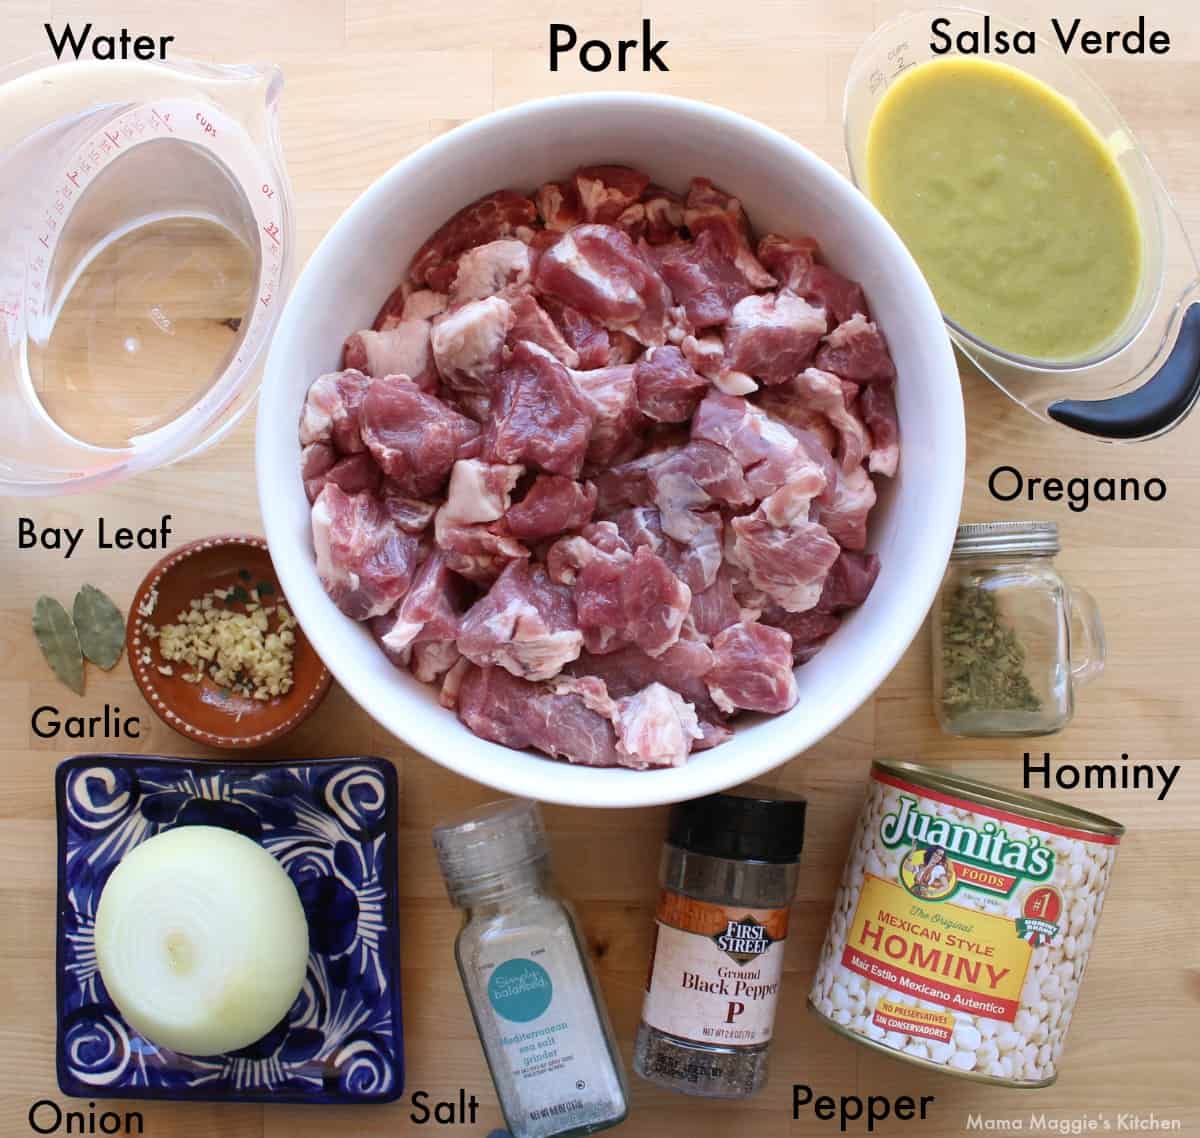 Ingredients for Instant Pot Pozole Verde on a wooden surface.